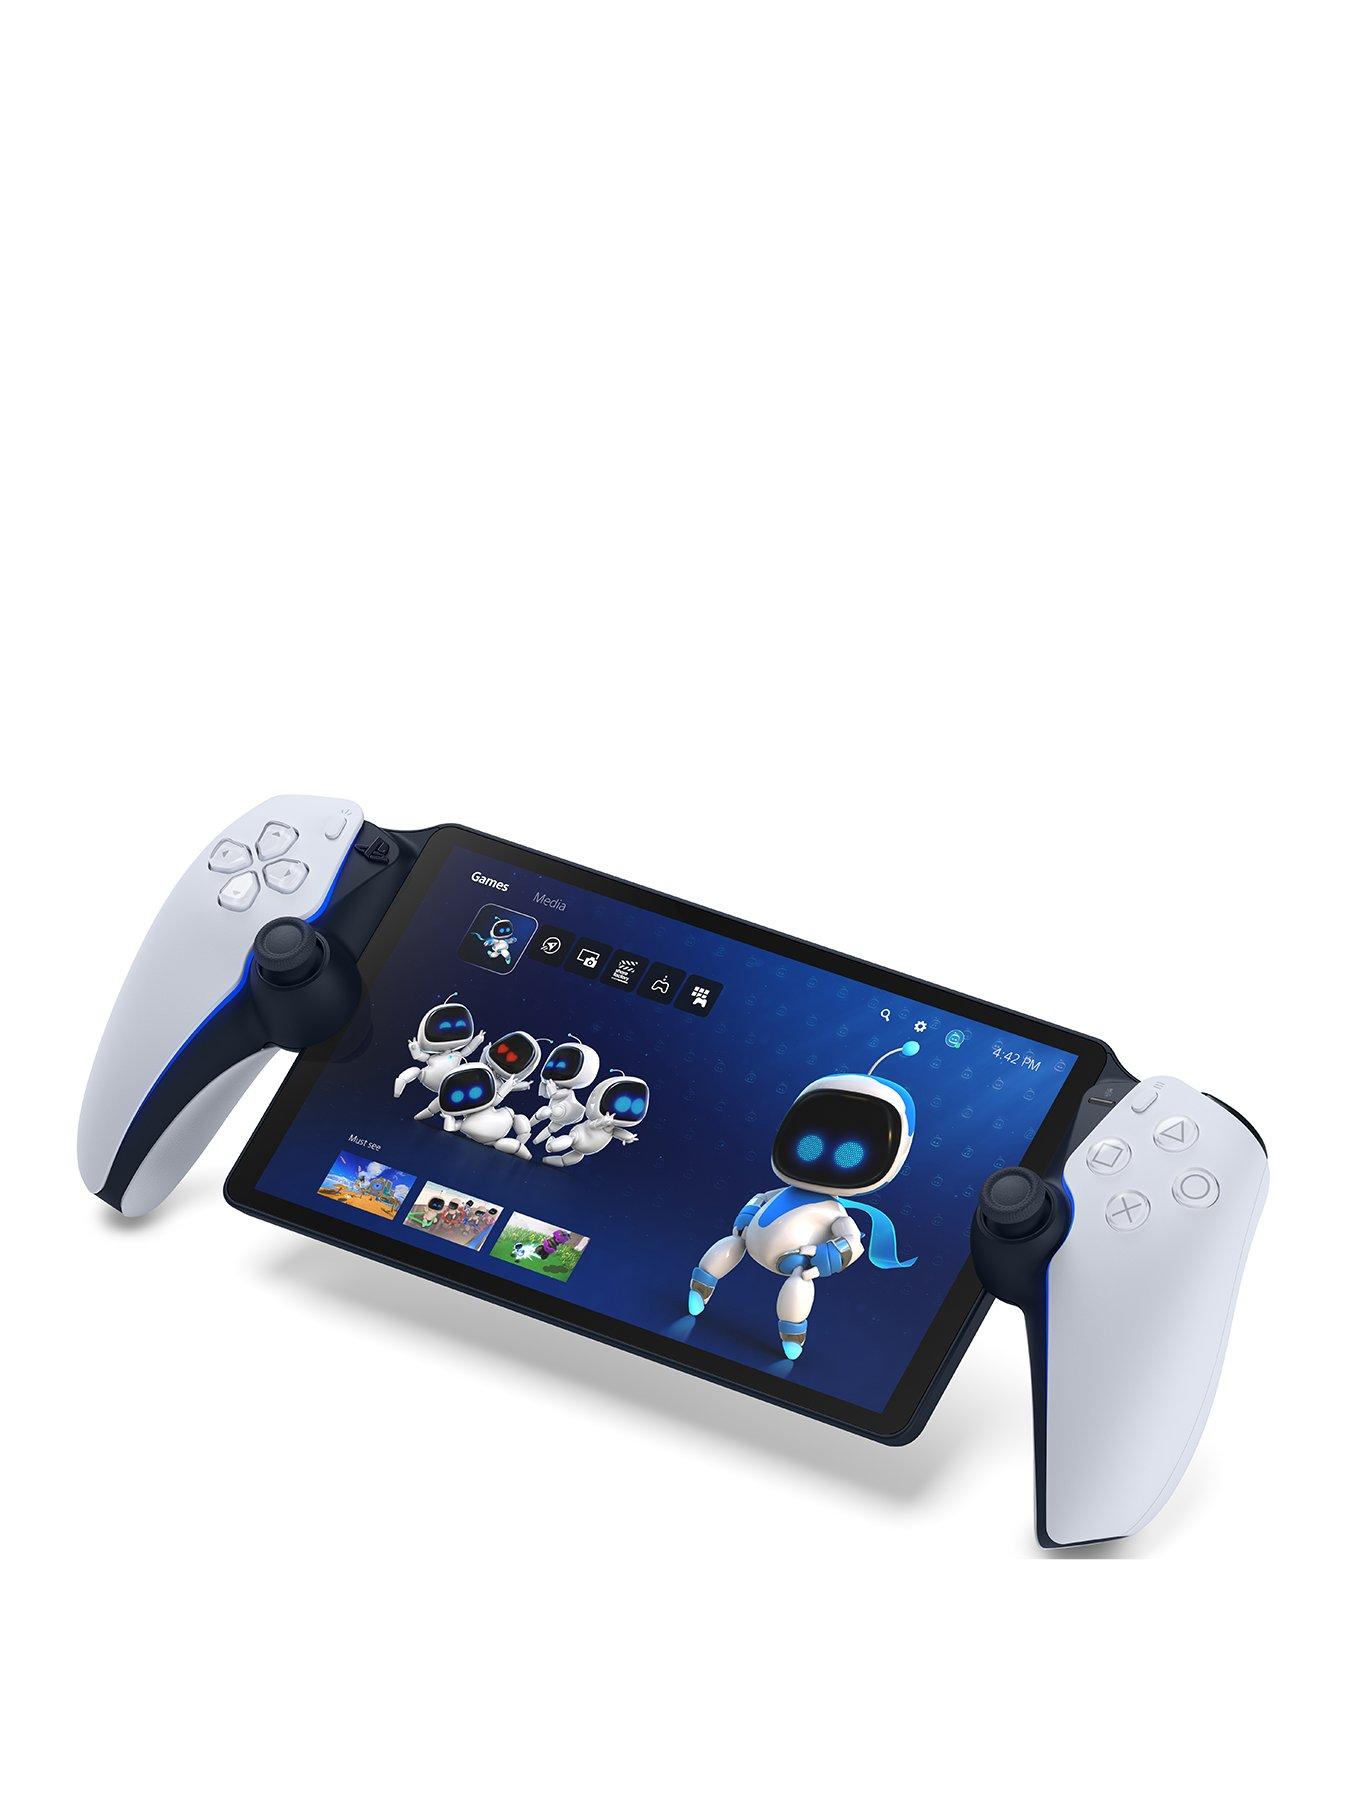 Update: PlayStation Portal Remote Play Device Launches November 15